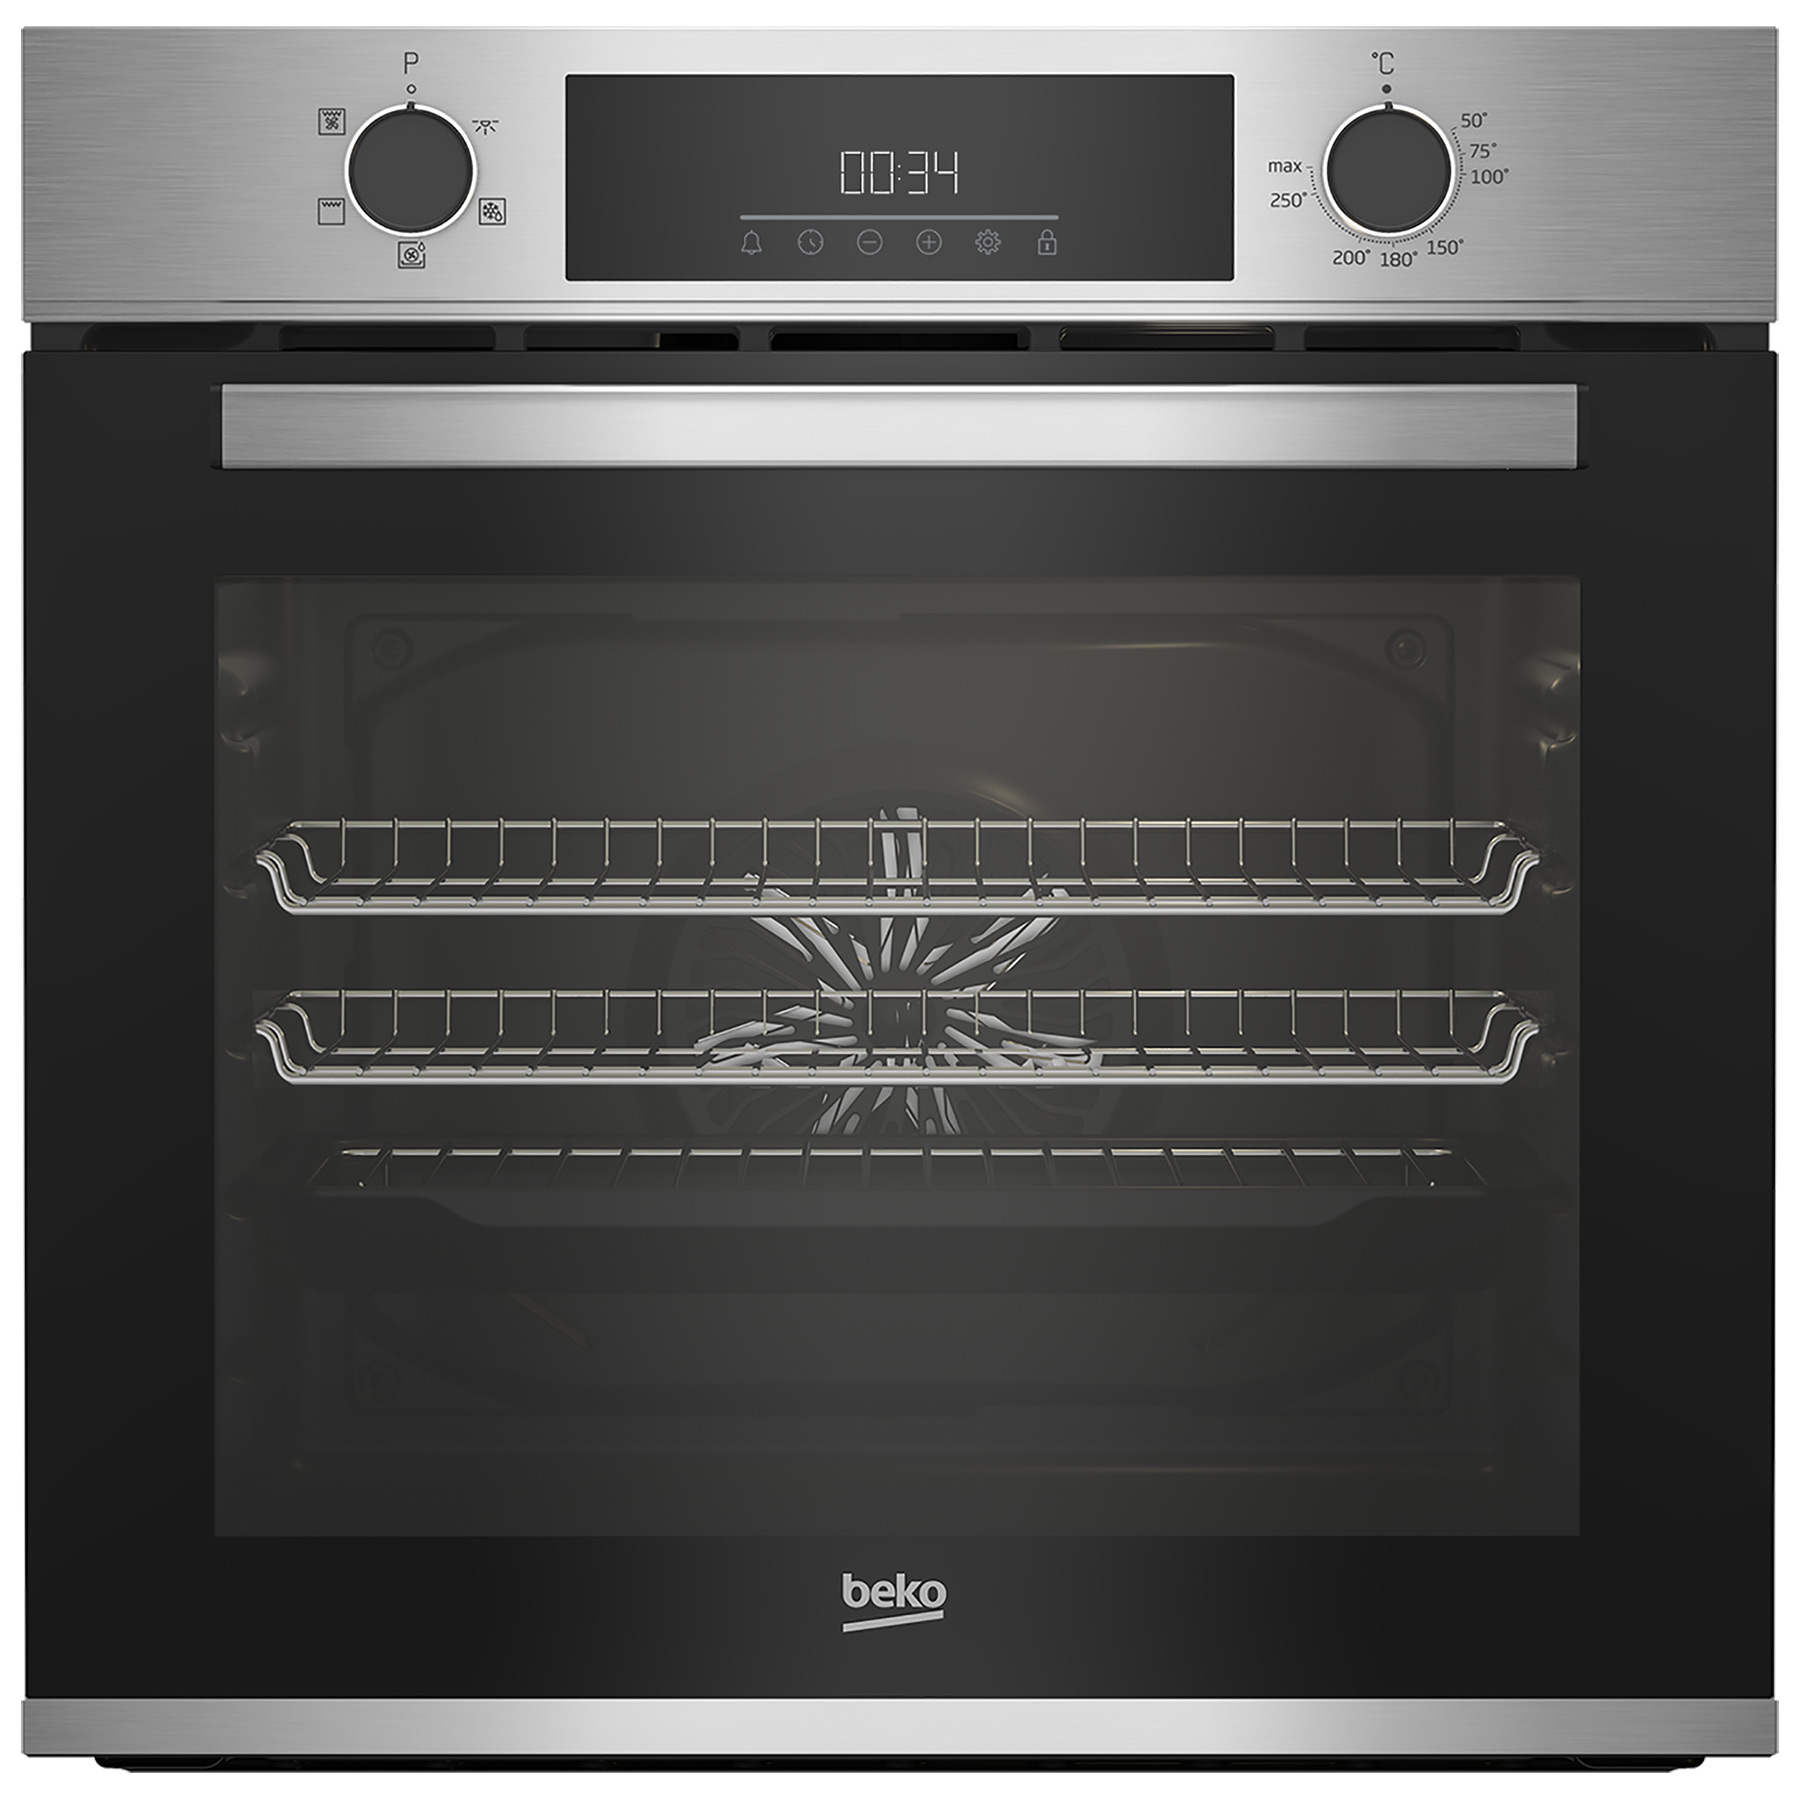 Beko CIFY81X Built In Electric Single Oven in St Steel 66L A Rated